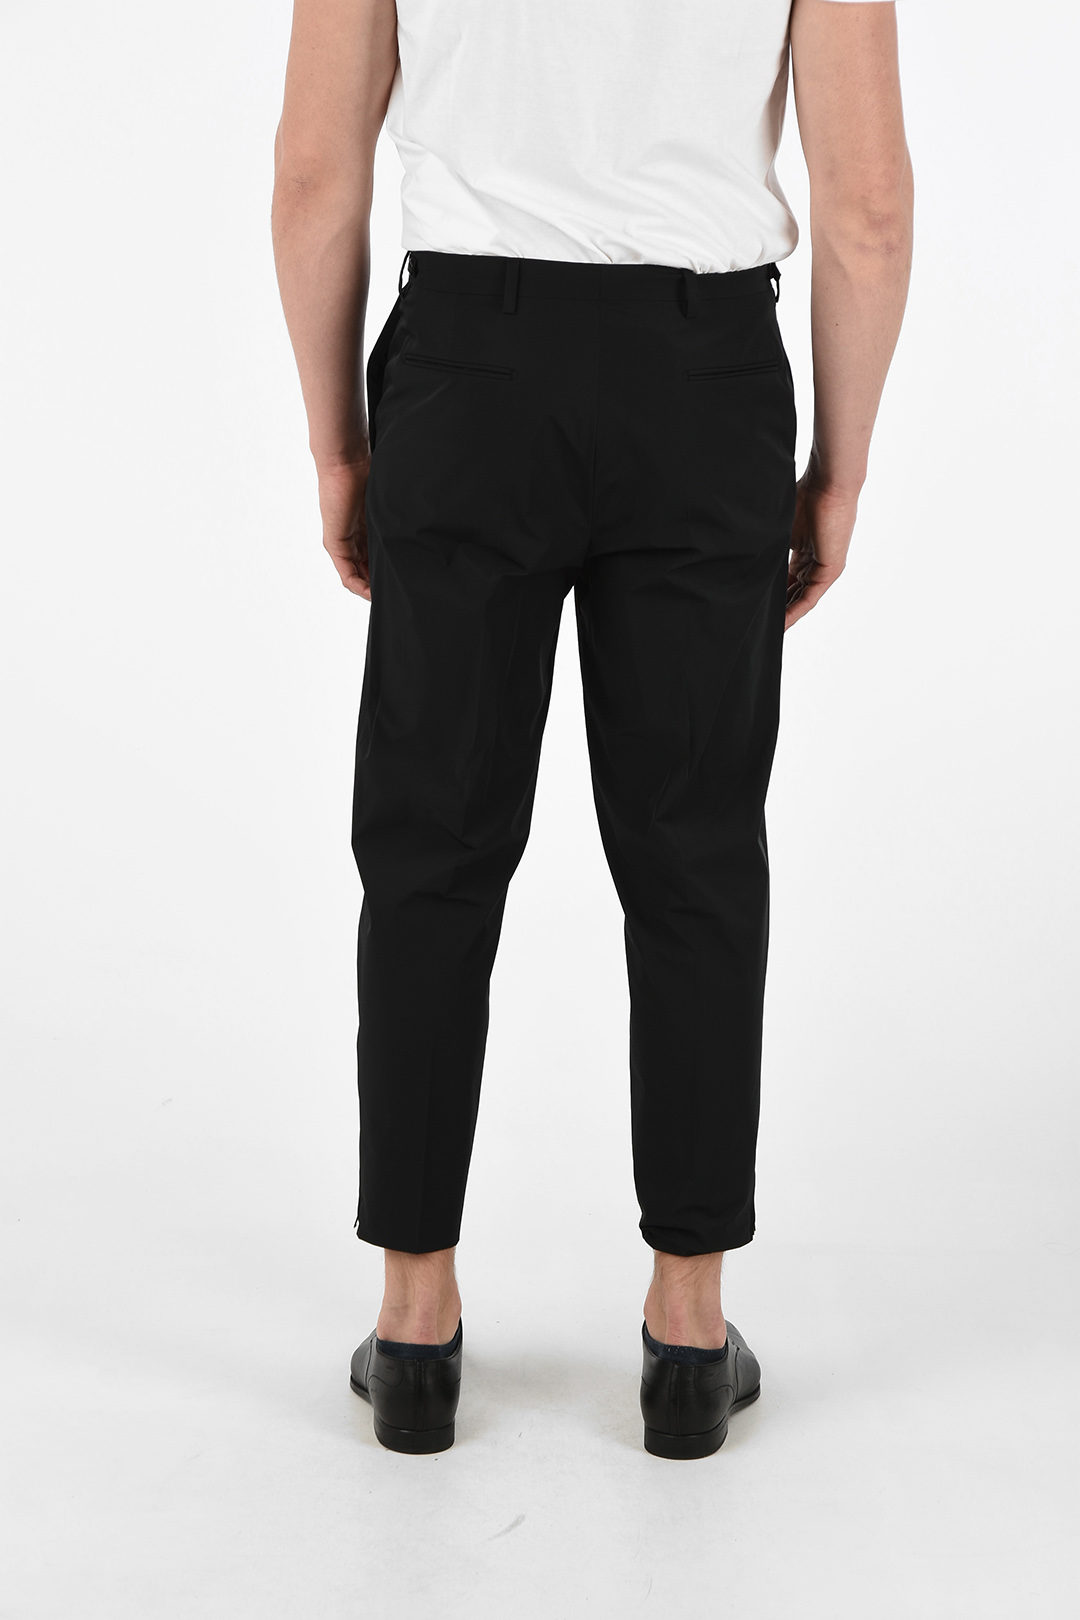 Prada Hidden Closure Pants with Ankle Zip men - Glamood Outlet